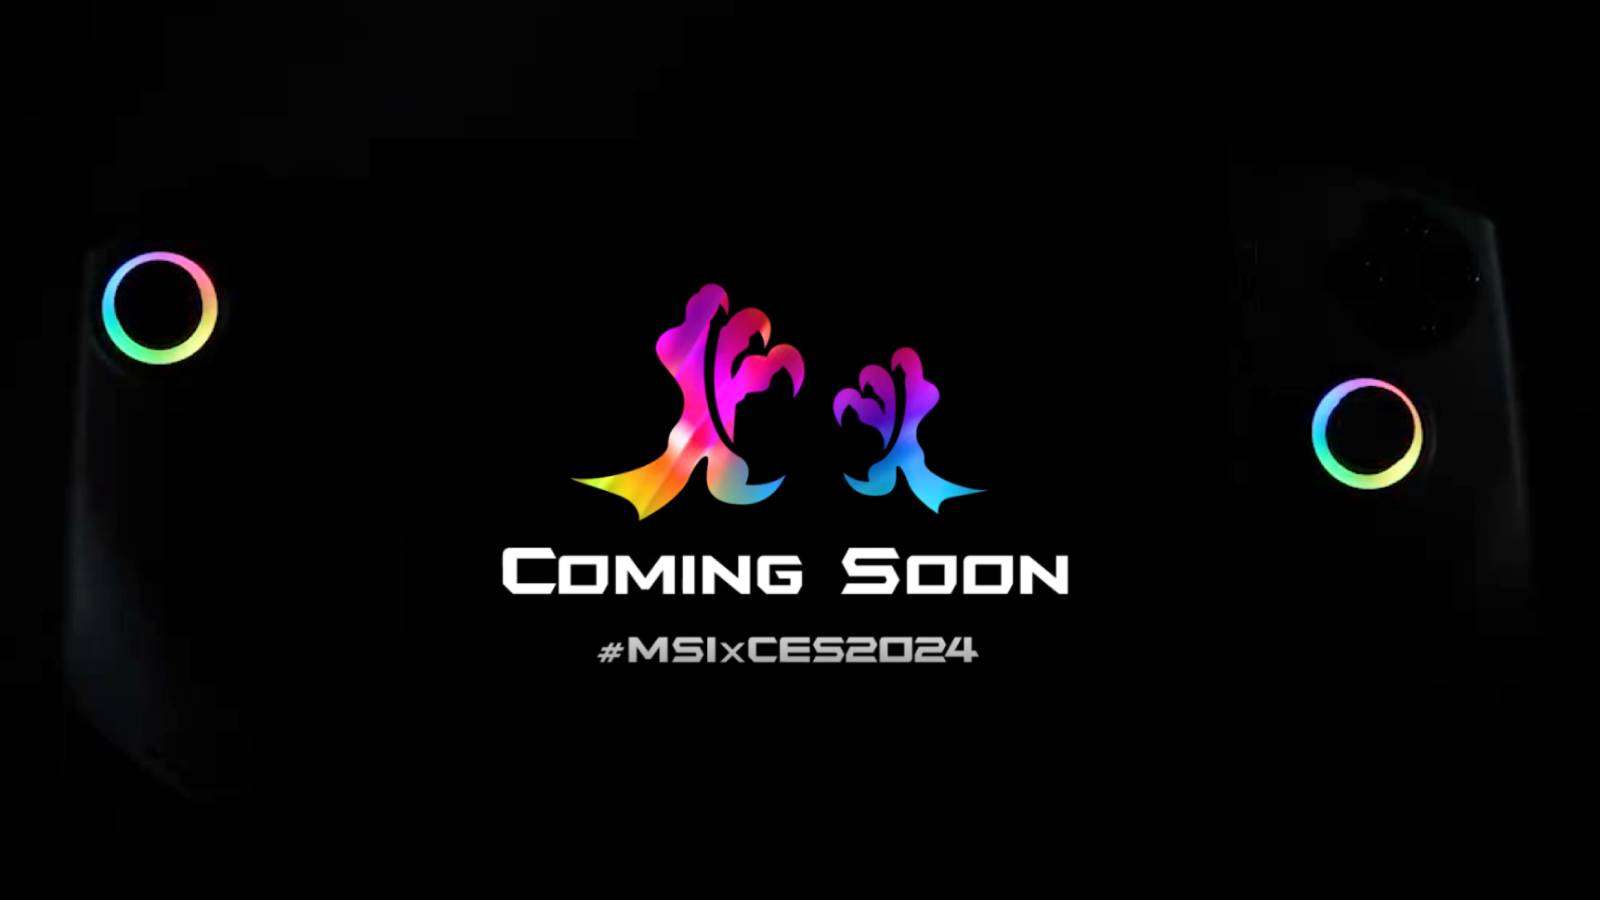 Image of the teaser MSI graphic for its upcoming handheld, on the screen of its handheld, for CES 2024.